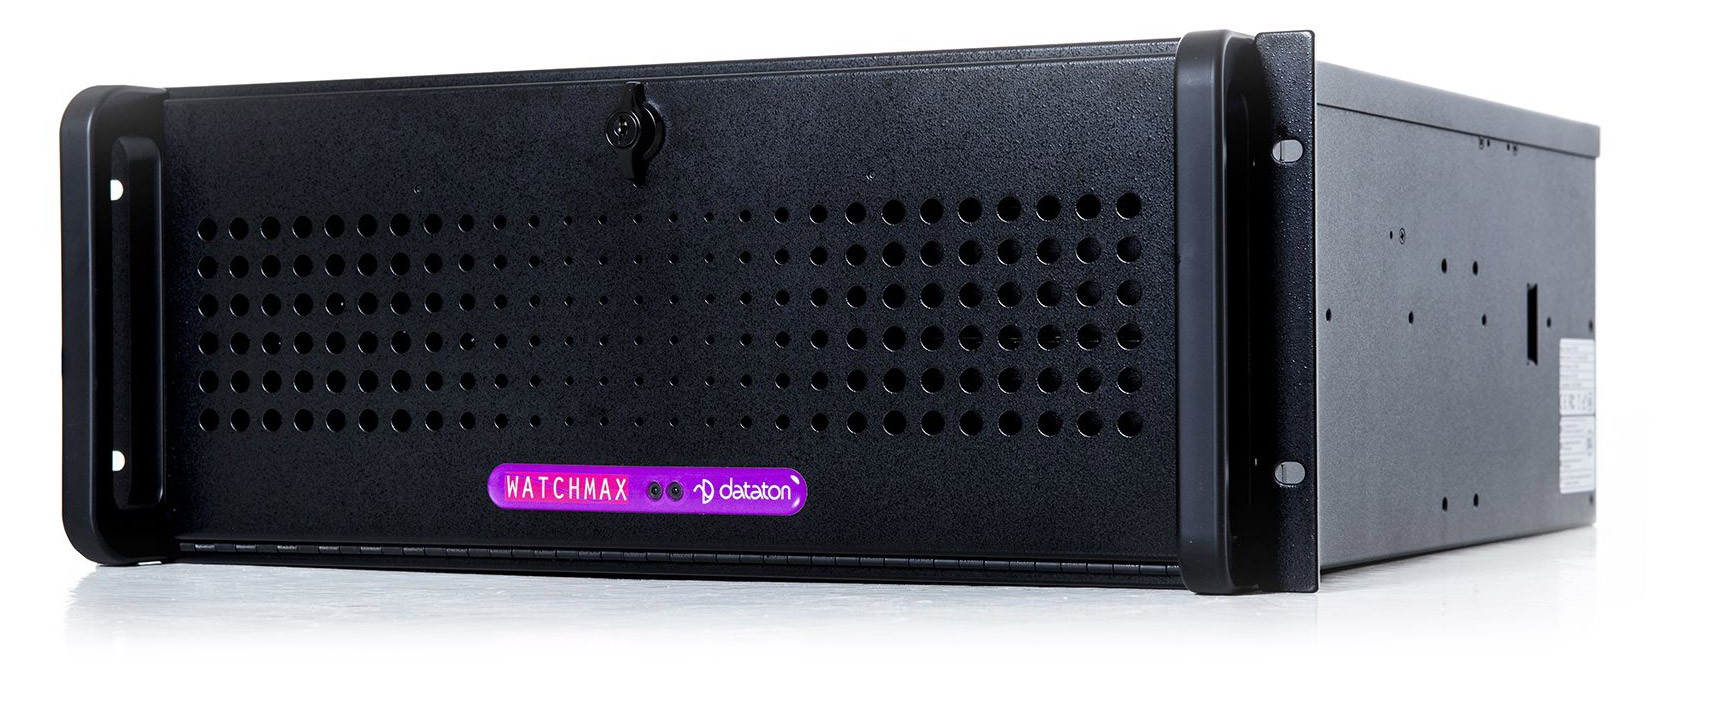 Dataton WATCHOUT media servers with various configuration options